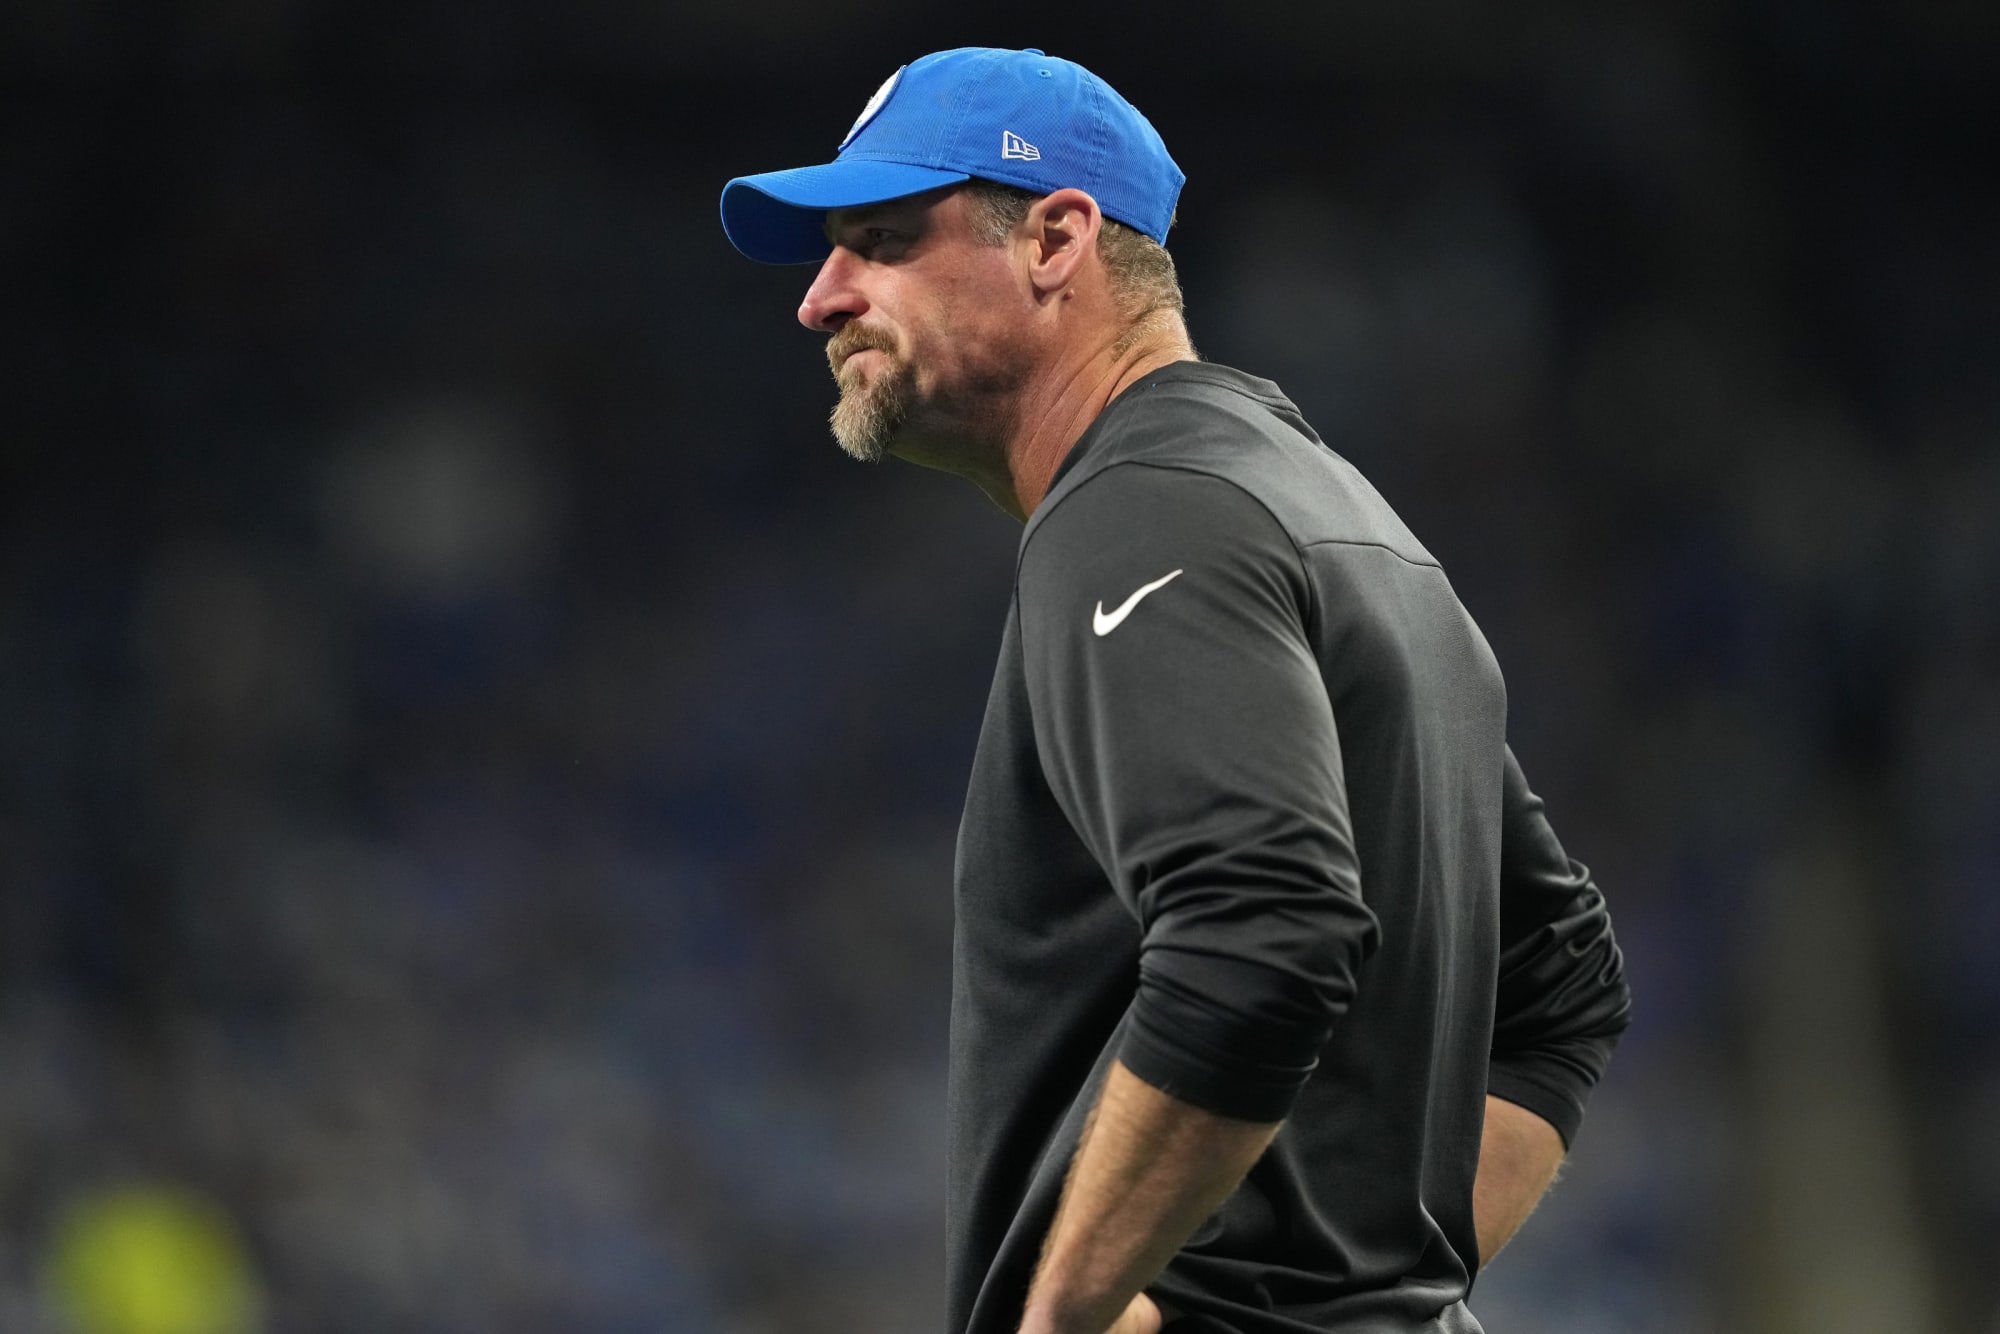 Lions head coach Dan Campbell snubbed from Coach of the Year consideration